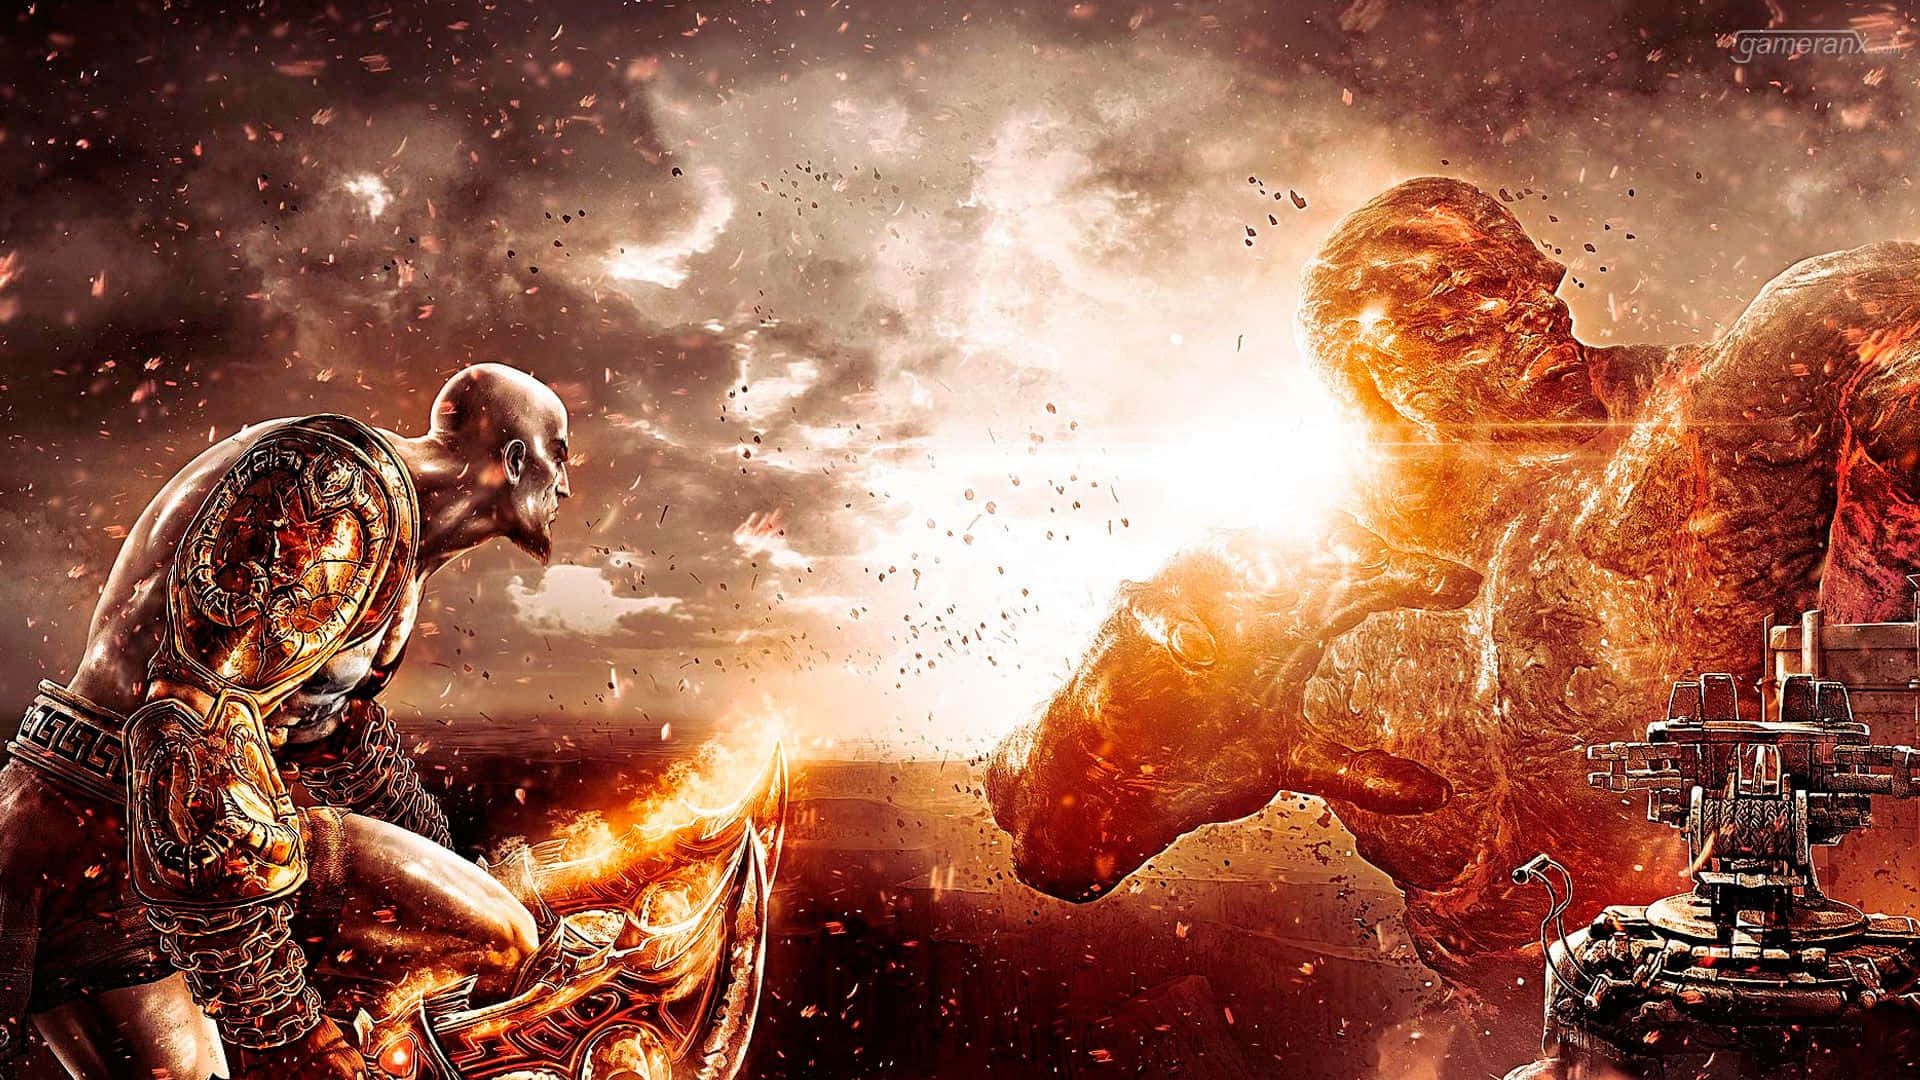 Kratos takes on a powerful enemy in God of War 3. Wallpaper